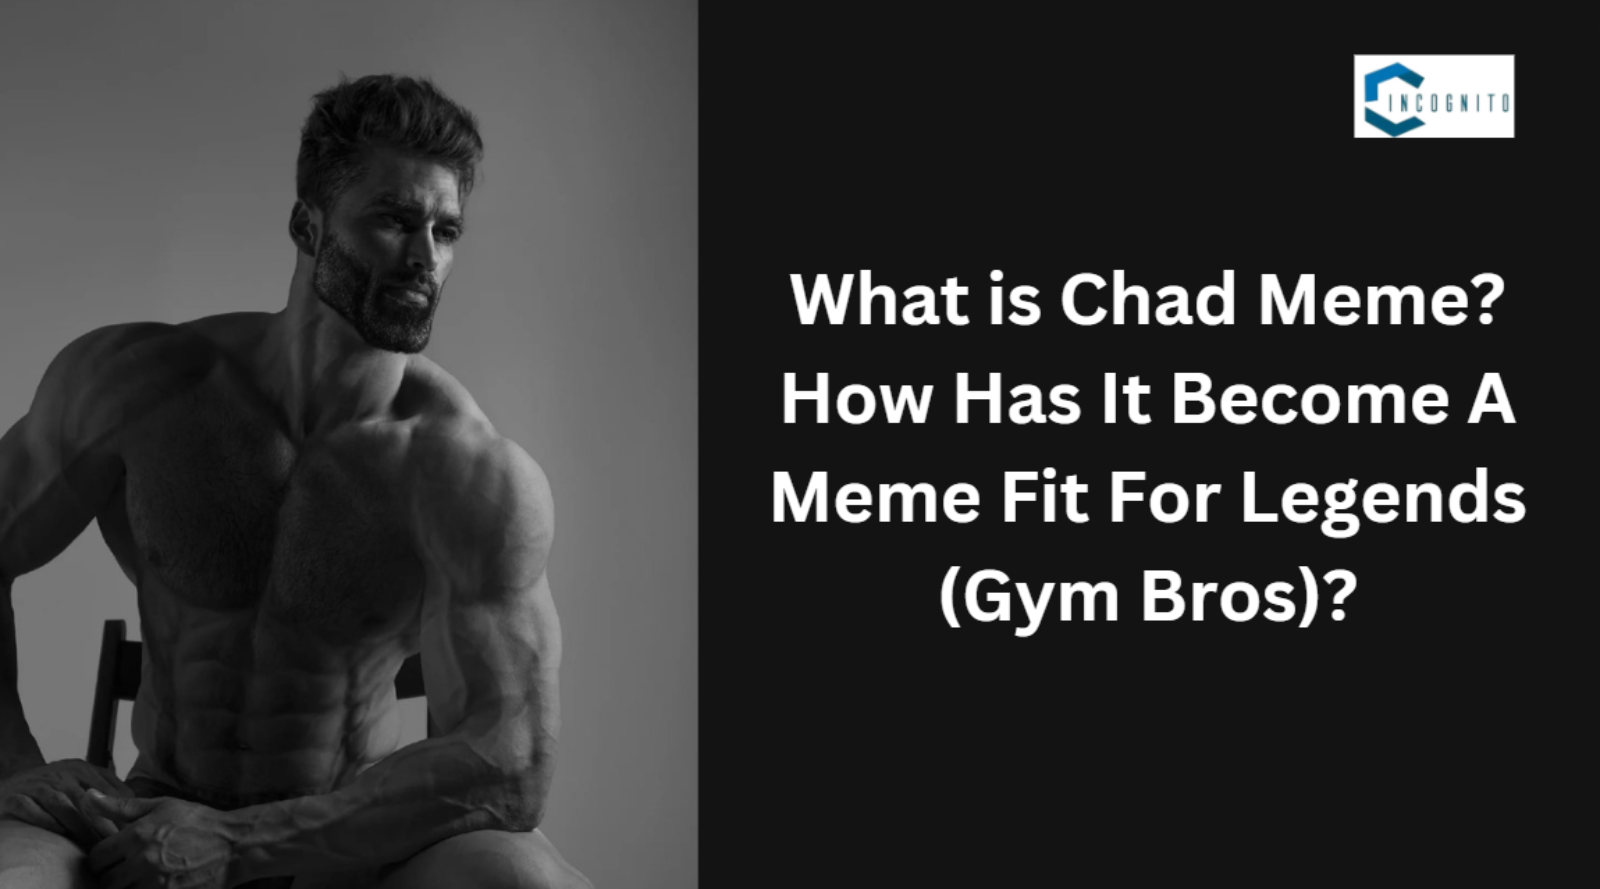 Chad Meme is A Meme Fit For Legends (Gym Bros) In 2024